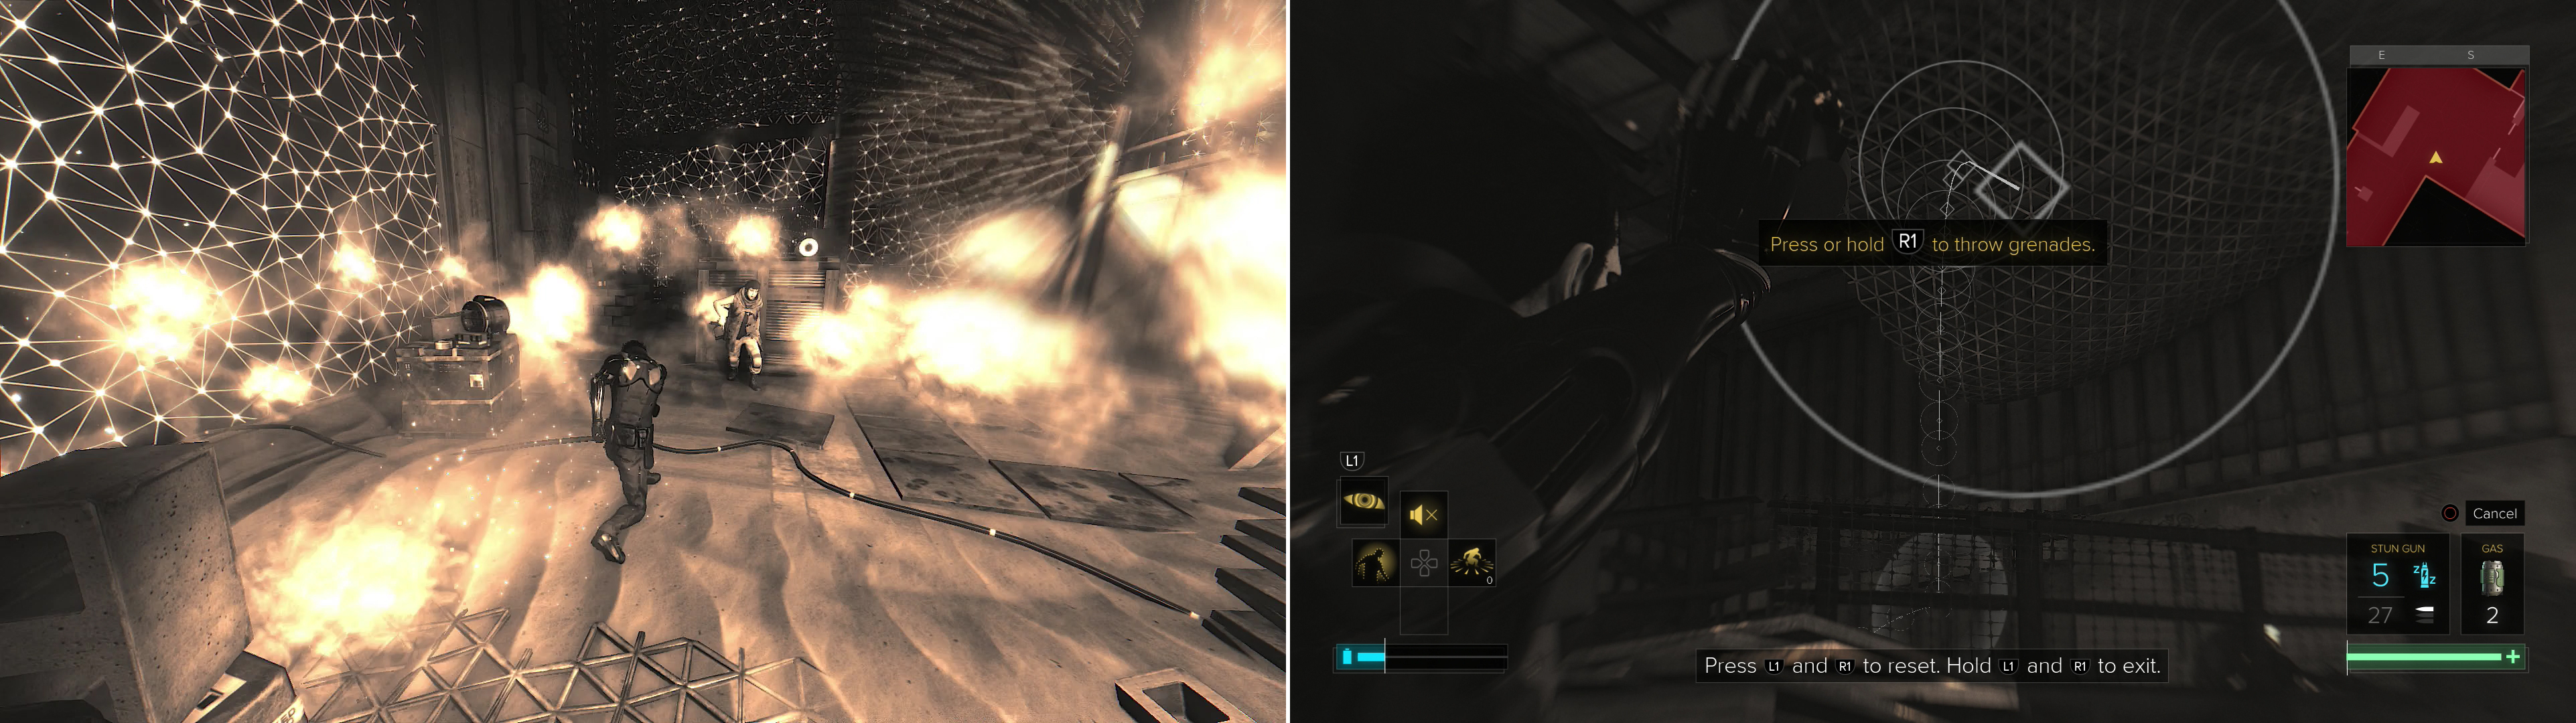 A combat tutorial will let you play with the “Typhoon” augmentation (left) and grenades (right).